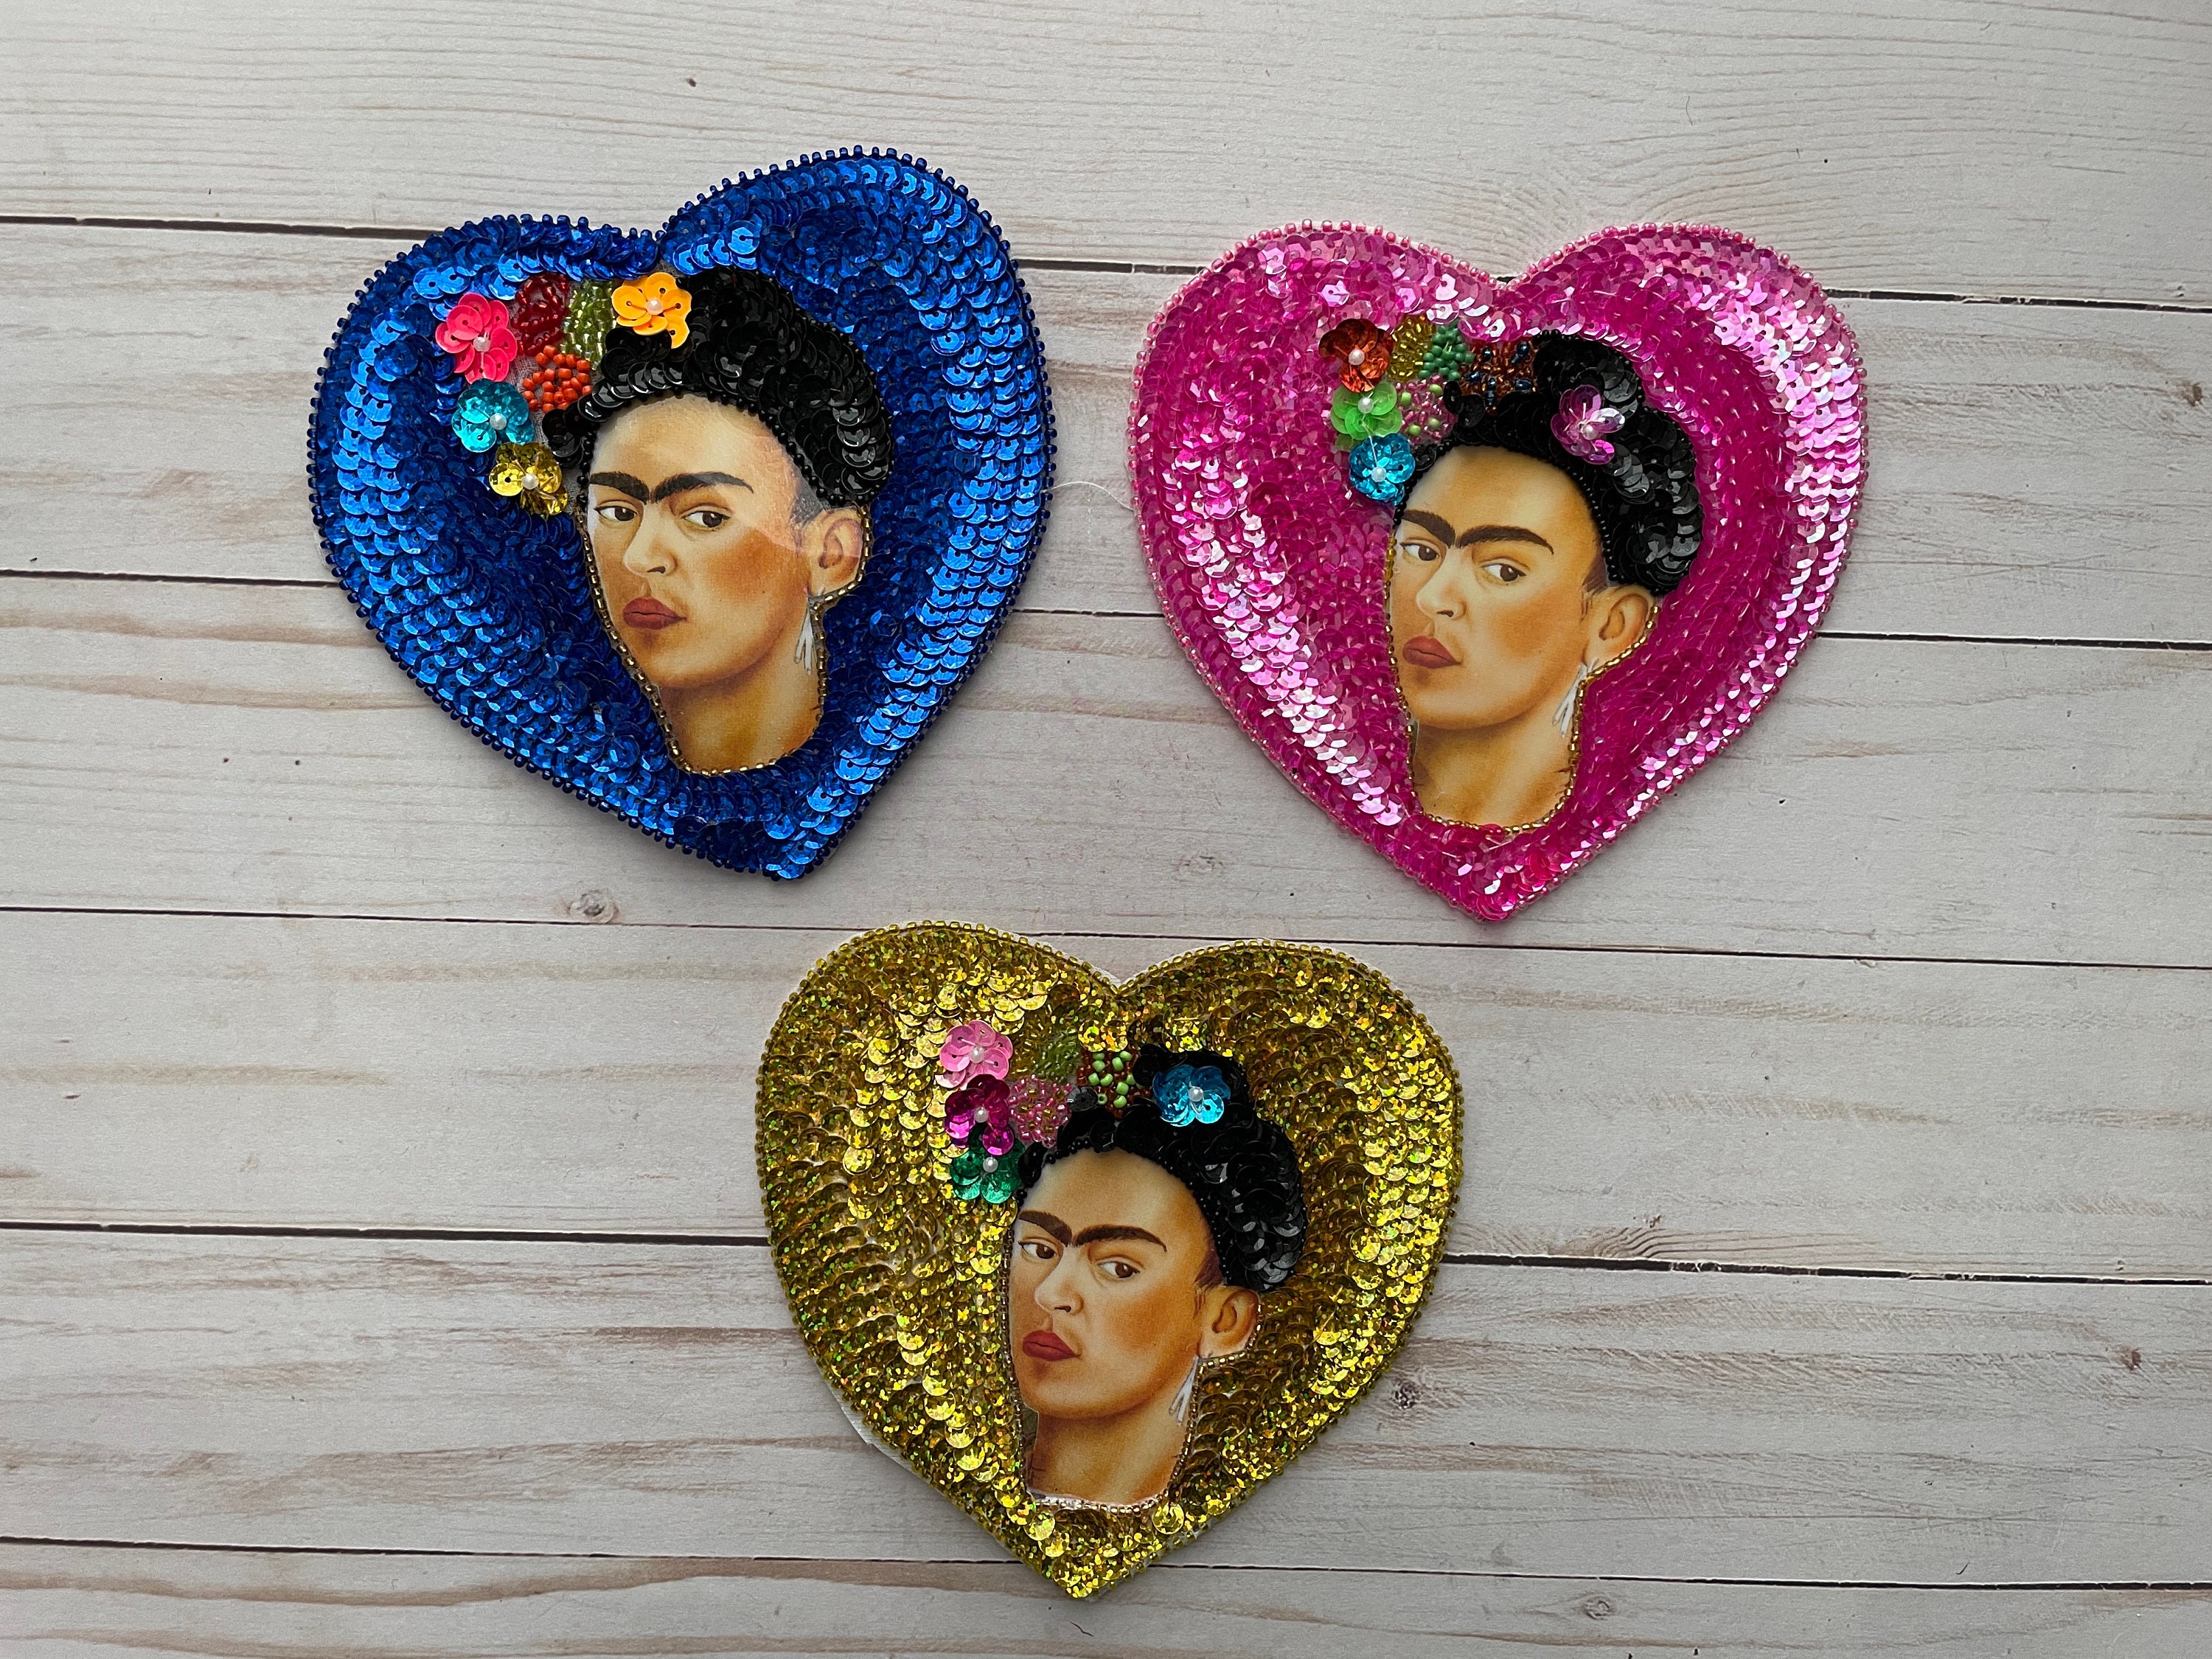 Radiant heart Large sequin patch - Mexicain bead applique - Casa Frida